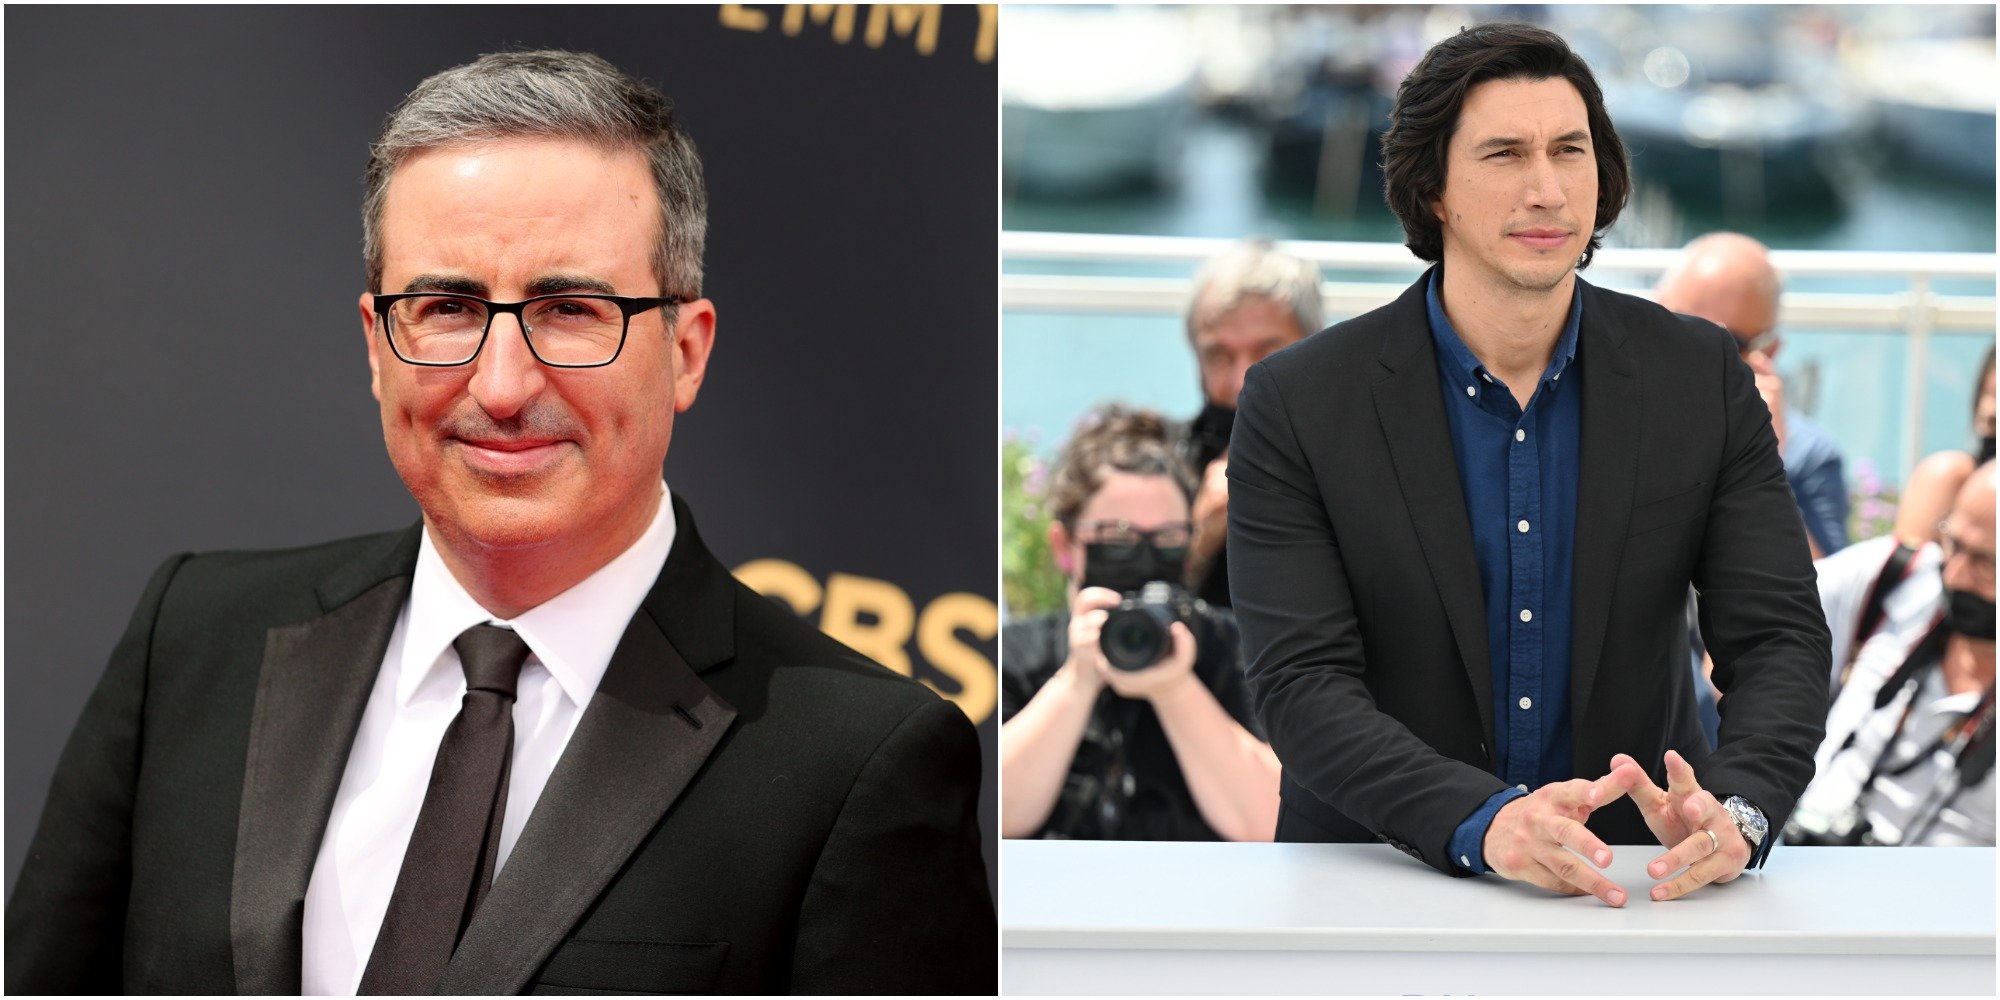 John Oliver smiles at the 73rd Emmys; Adam Driver poses at the Cannes Film Festival